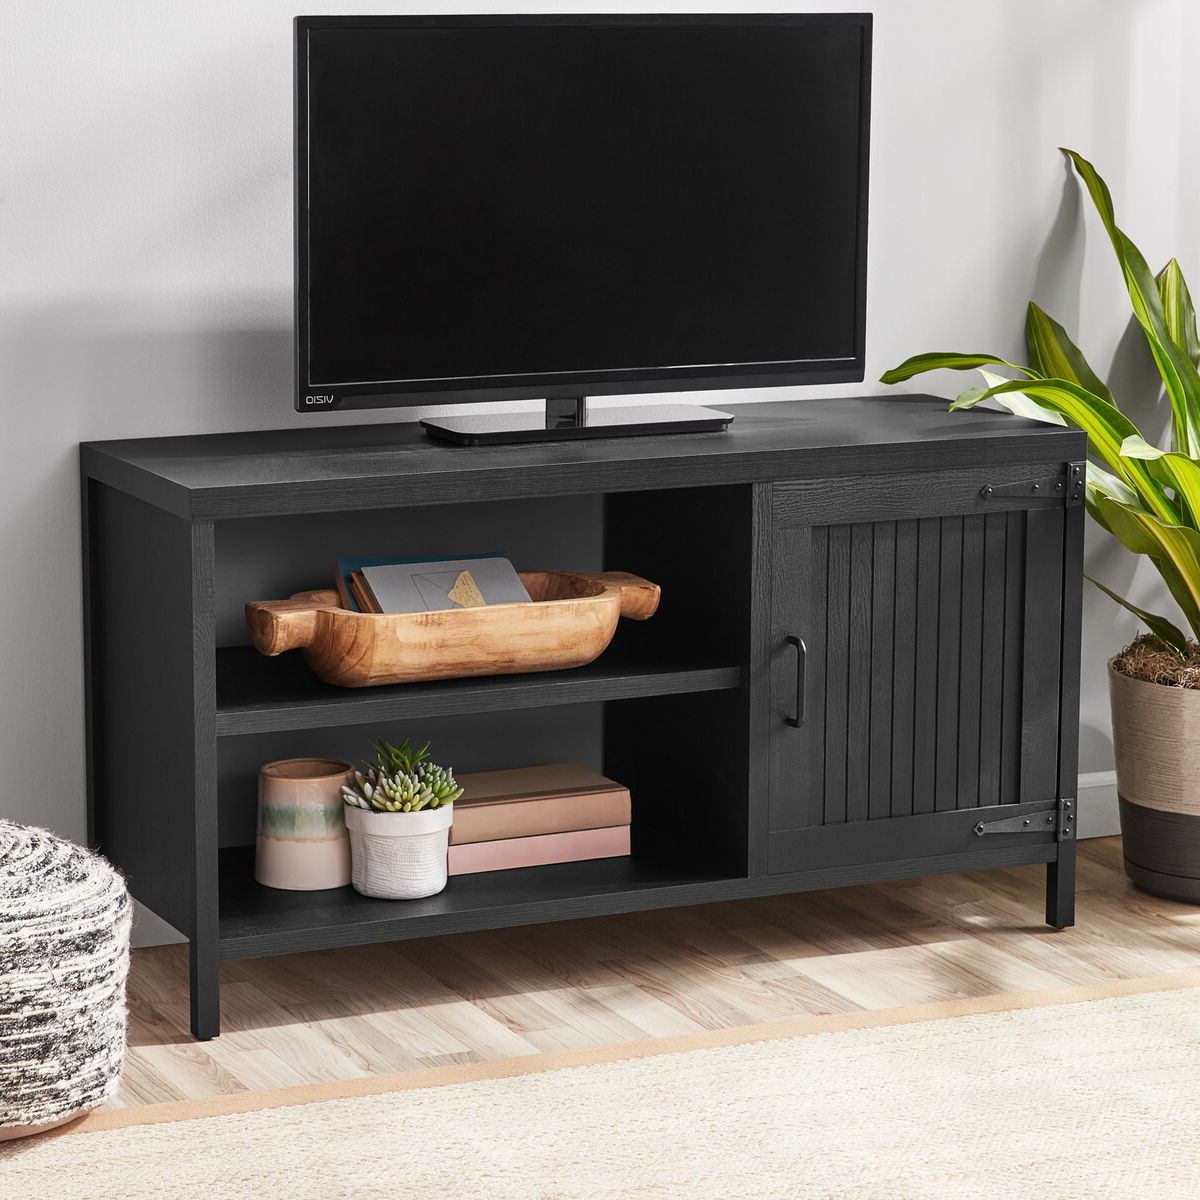 Farmhouse Tv Stand With Adjustable Shelf Open Back Storage For Tvs Up To  50" | Ebay In Farmhouse Stands With Shelves (View 18 of 20)